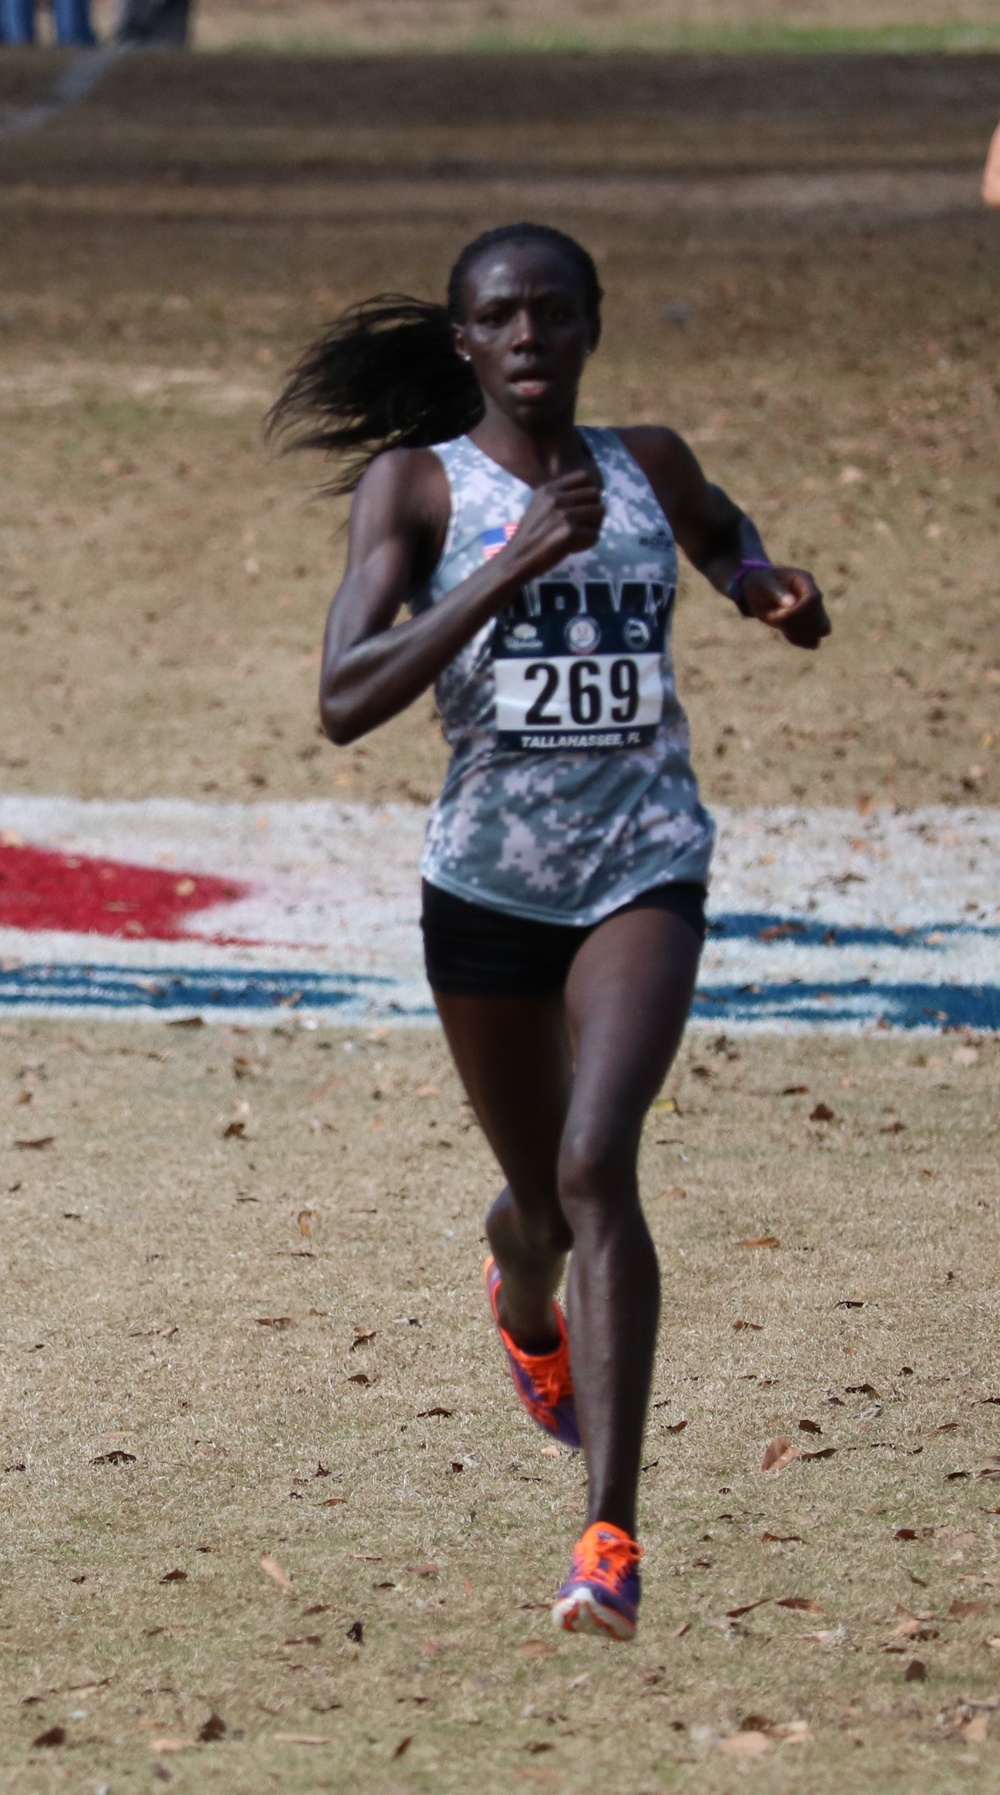 Army Susan Tanui of Fort Carson, Colo. took home the Armed Forces gold medal